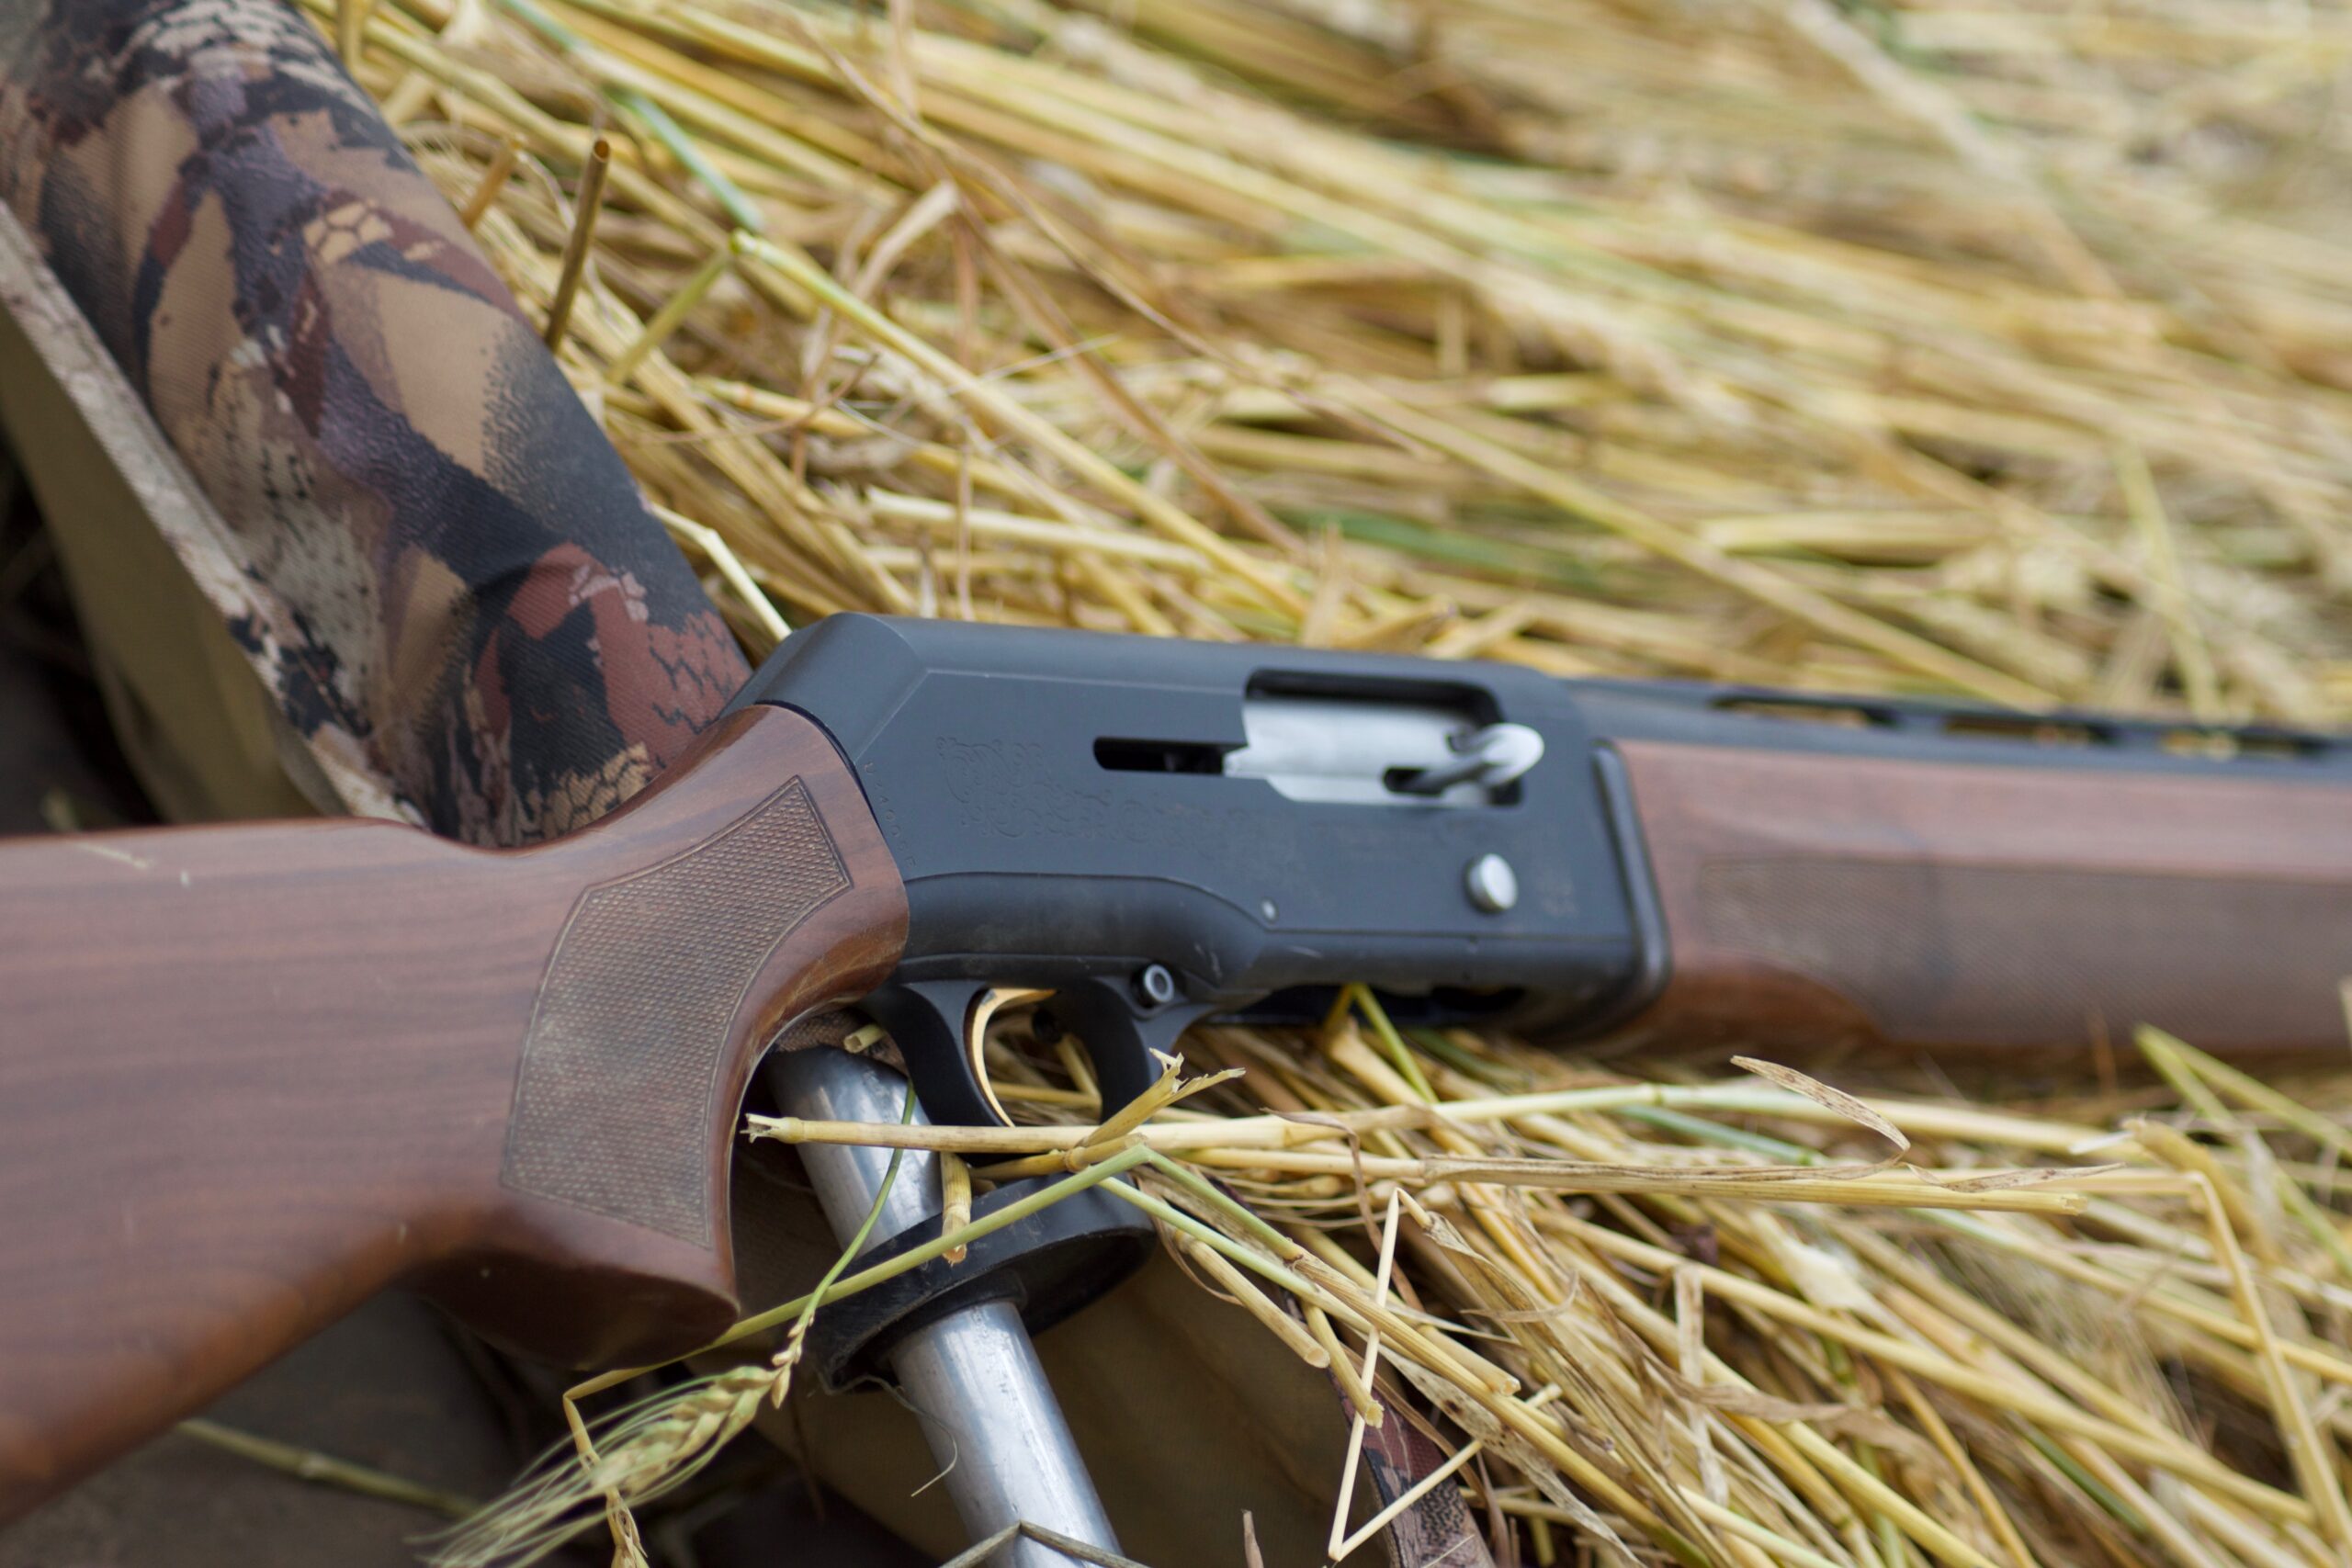 The Beretta AL 390 is an incredible hunting shotgun in the autoloader category.